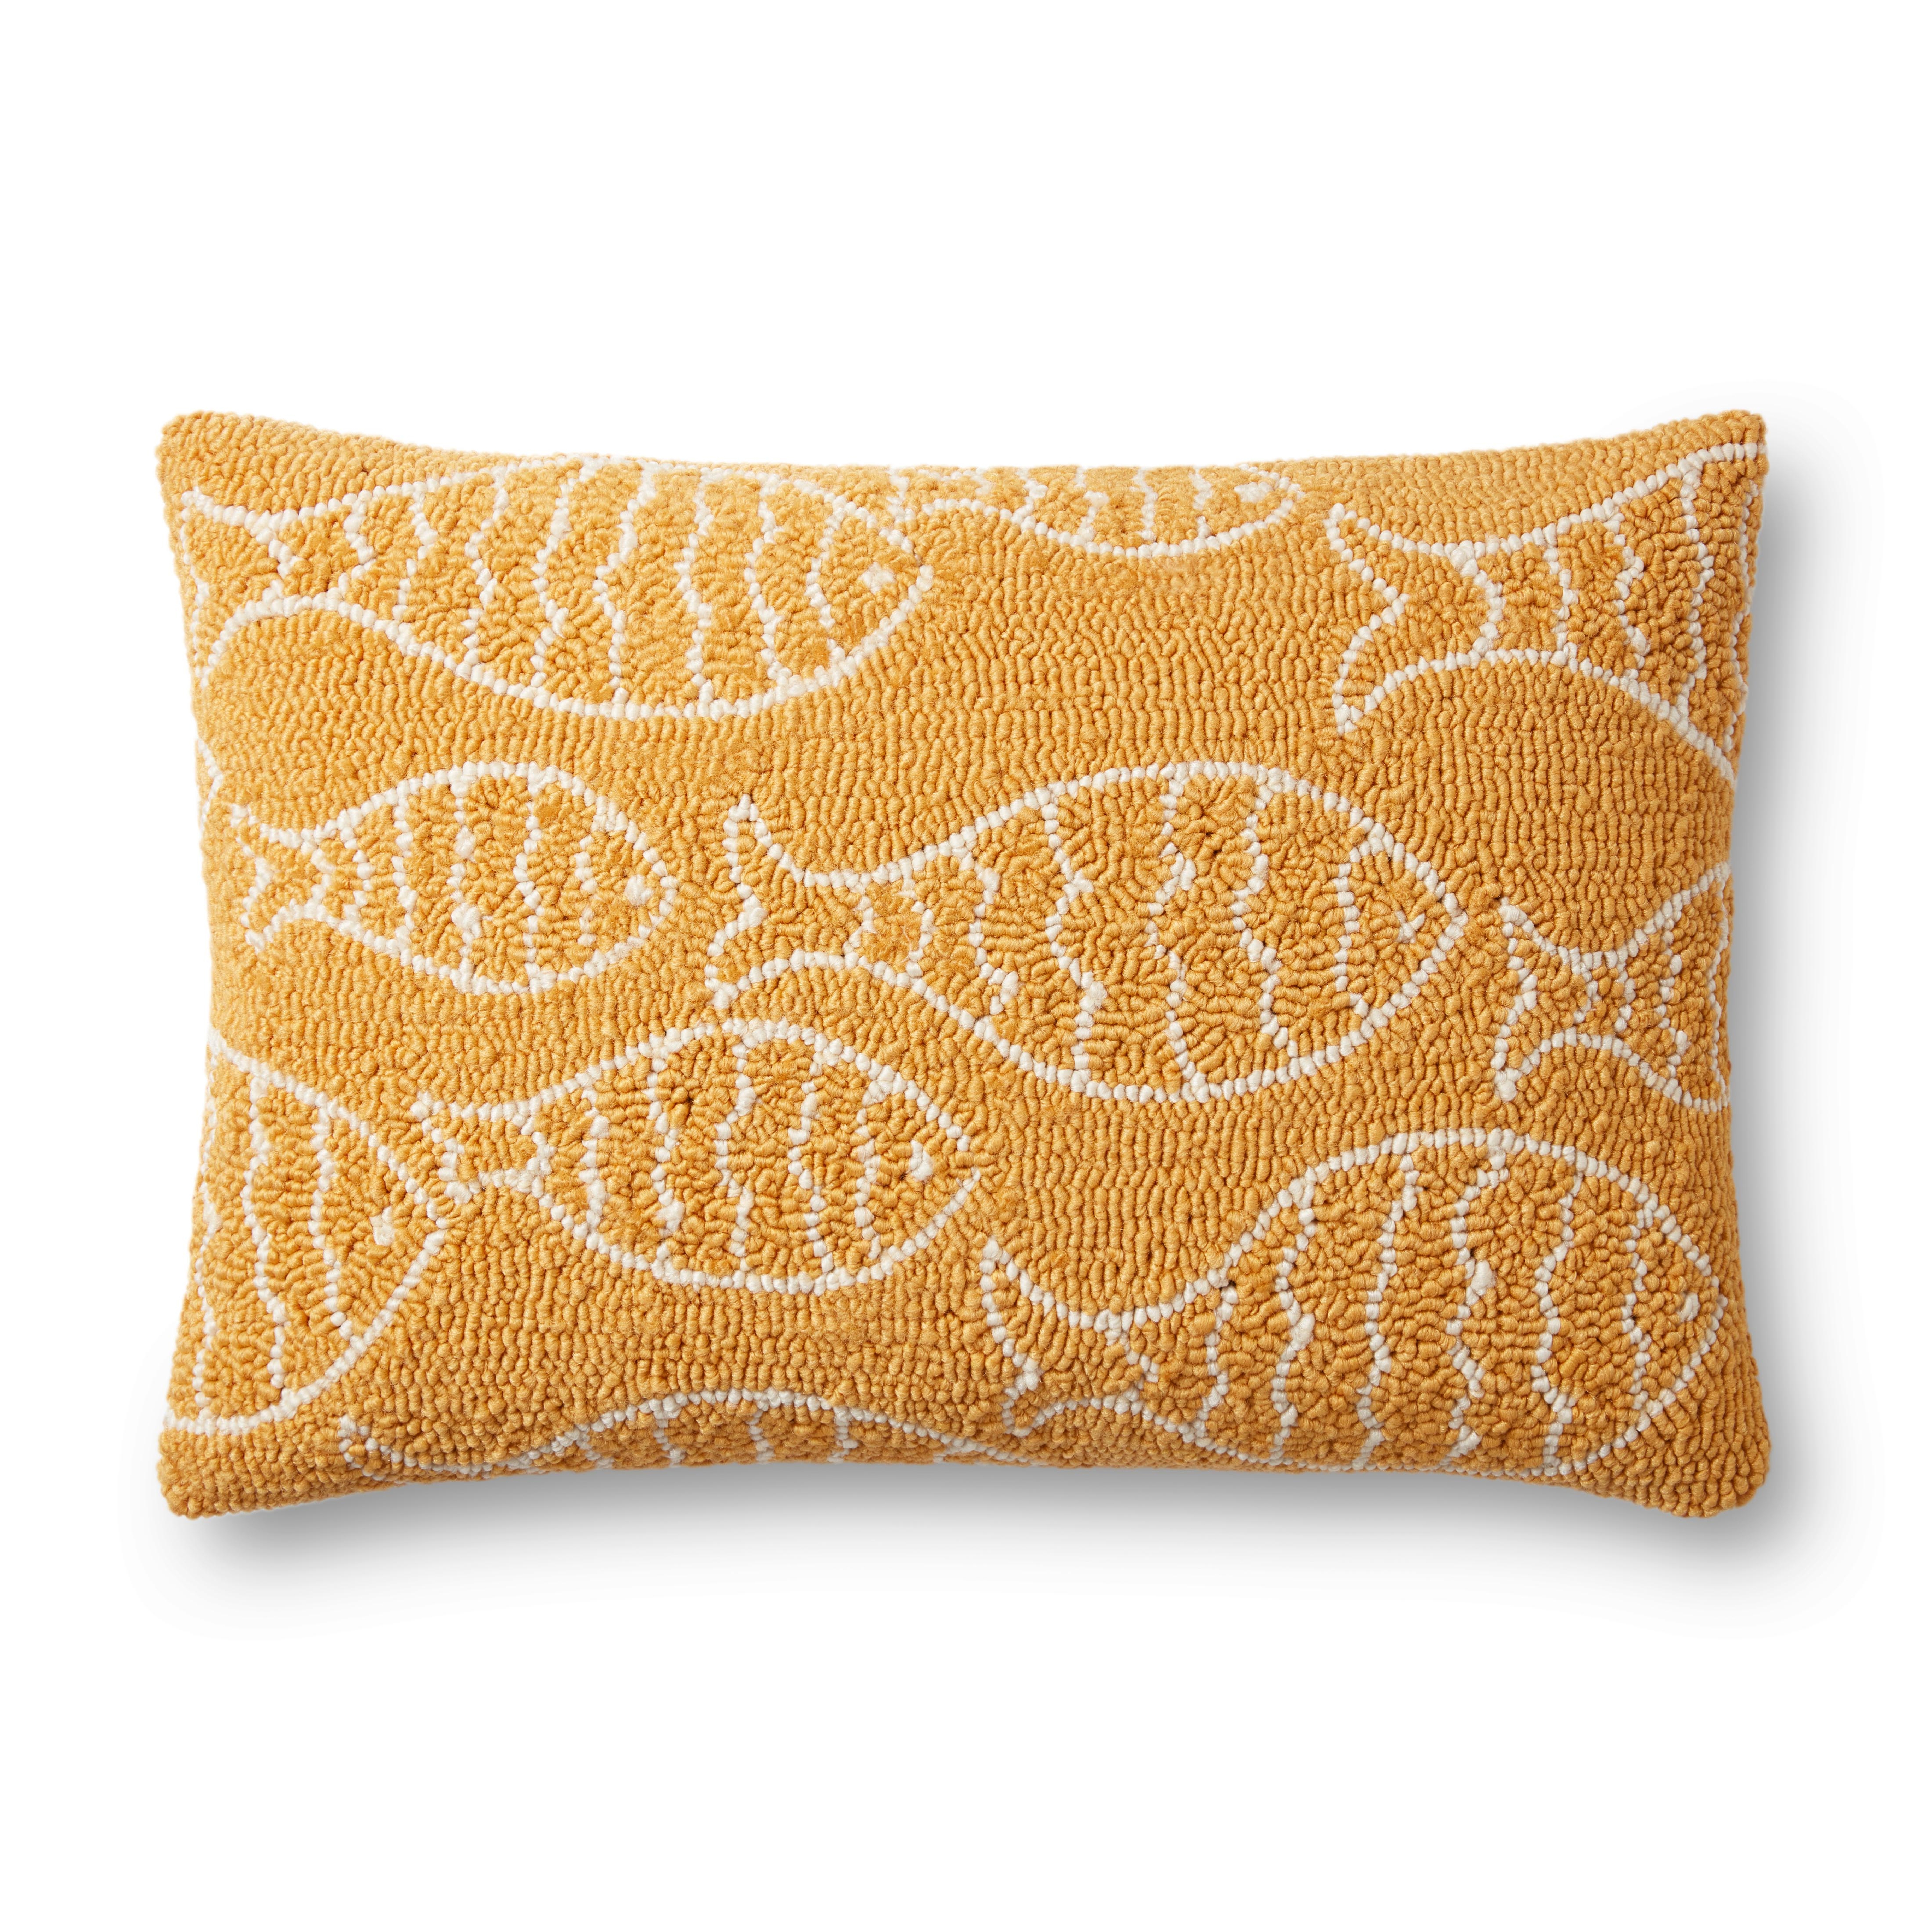 Loloi Pillows P0908 Yellow 16" x 26" Cover Only - Loloi Rugs